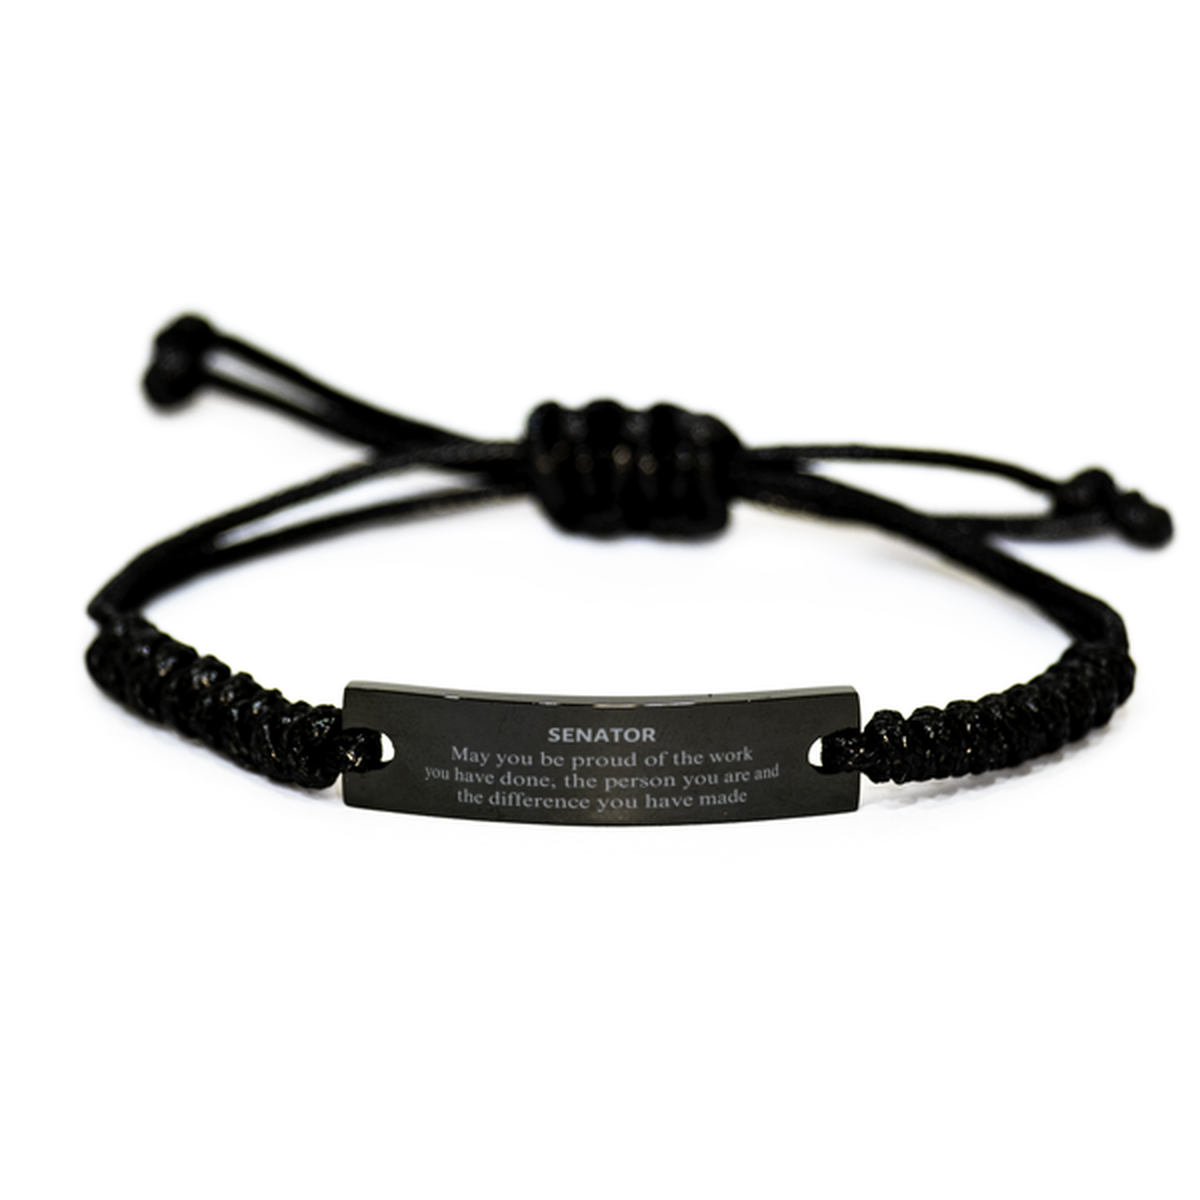 Senator May you be proud of the work you have done, Retirement Senator Black Rope Bracelet for Colleague Appreciation Gifts Amazing for Senator